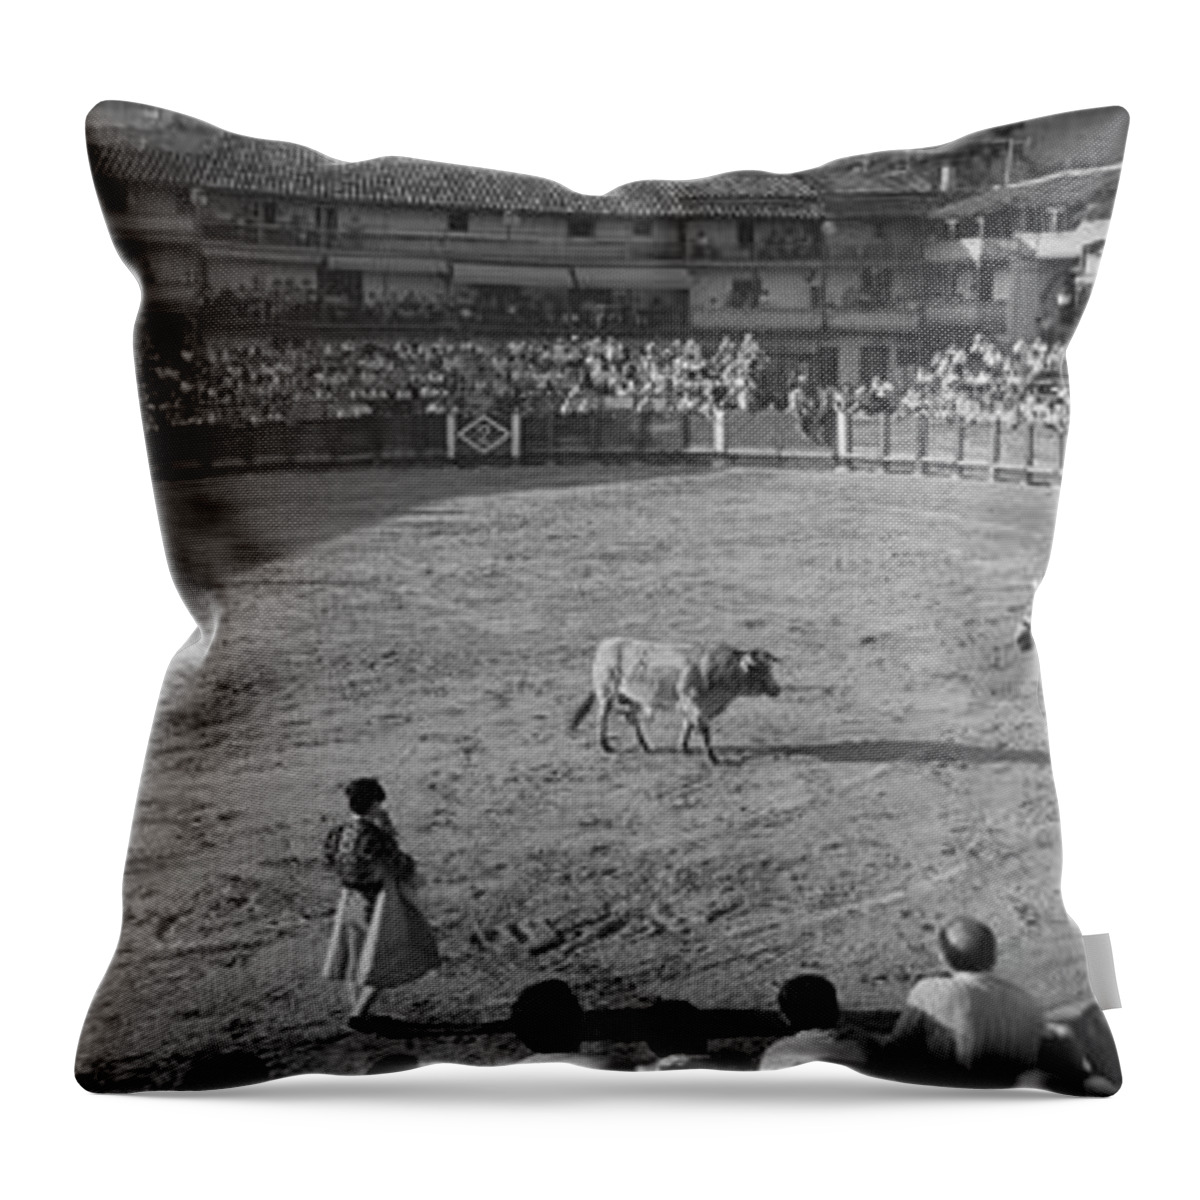 Bull Bullfight Bullfighter Conflict Confrontation Crowd Danger Determination Excitement Horse Matador Mediterranean Countries Riding Shadow Spain Spanish Culture Sports Strength Traditional Culture Travel Destinations Two Animals Vitality Anticipation Arena Bullring Corrida De Toros Day Entertainment Expertise Fun High Angle View Horizontal National Sport Outdoors Panoramic Photography Plaza De Toros Professional Risk Skill Spectacle Spectator Traditional Clothing Stadium Black And White Image Throw Pillow featuring the photograph Spectators watching bullfighting in a stadium, Spain by Panoramic Images